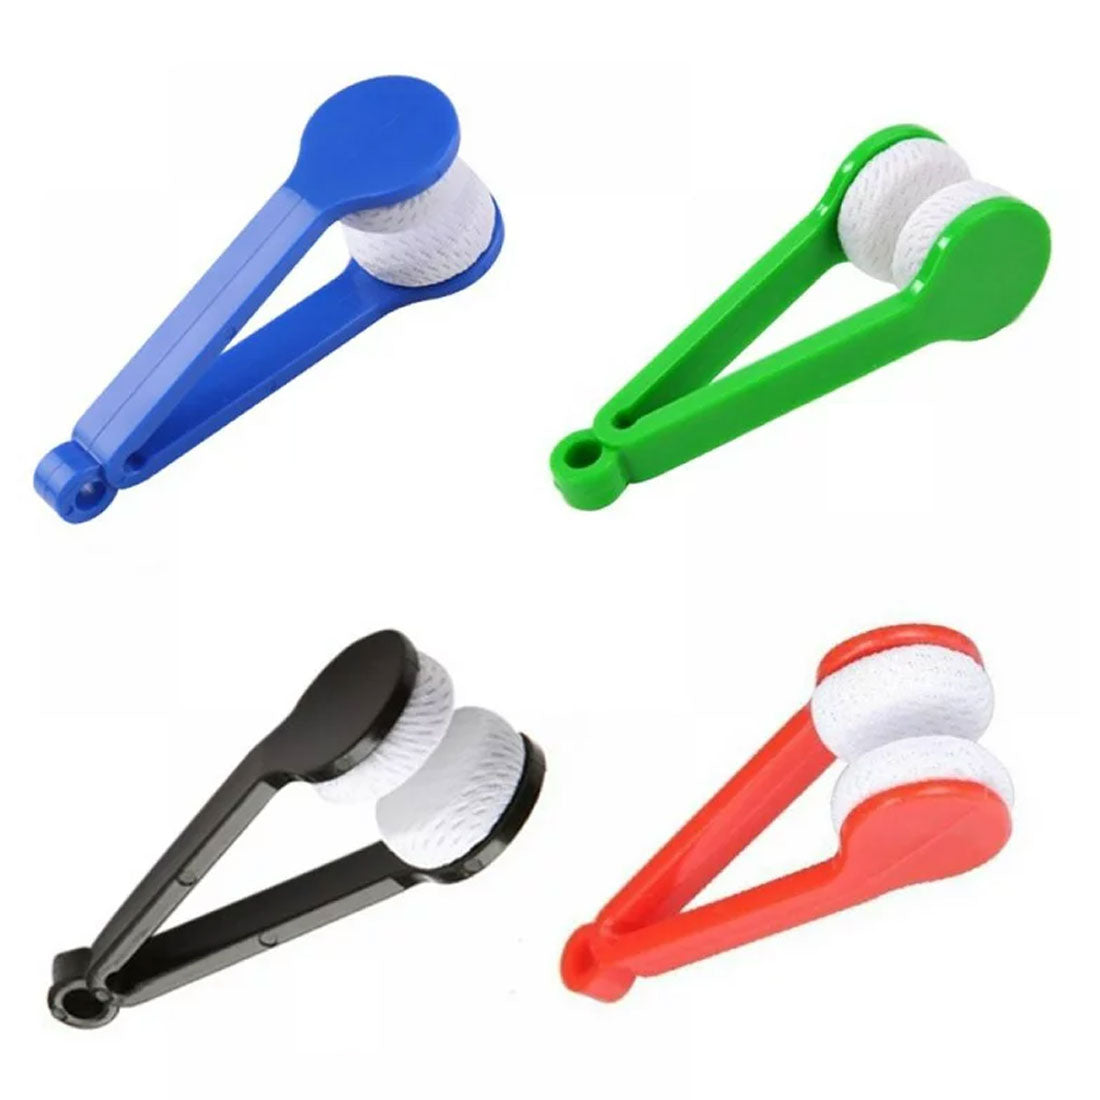 Microfiber Cleaning Brush For Sunglasses And Adjustable Eyeglasses